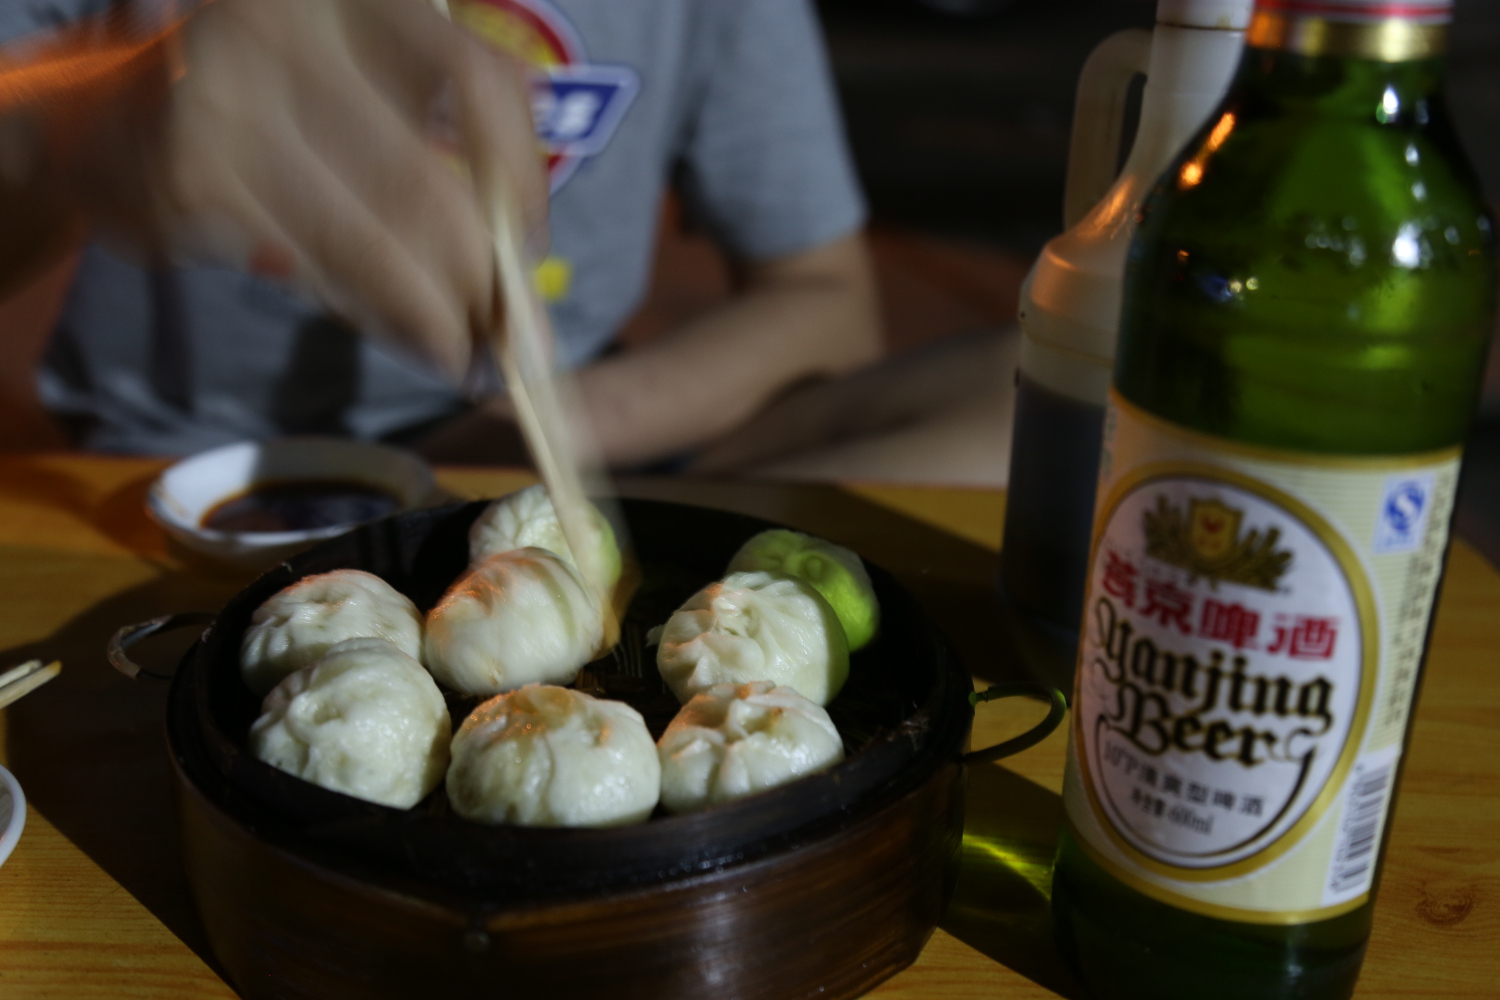 Dumplings and beer: a perfect cheap dinner. Image by Agang-yargyi / londoninfopage